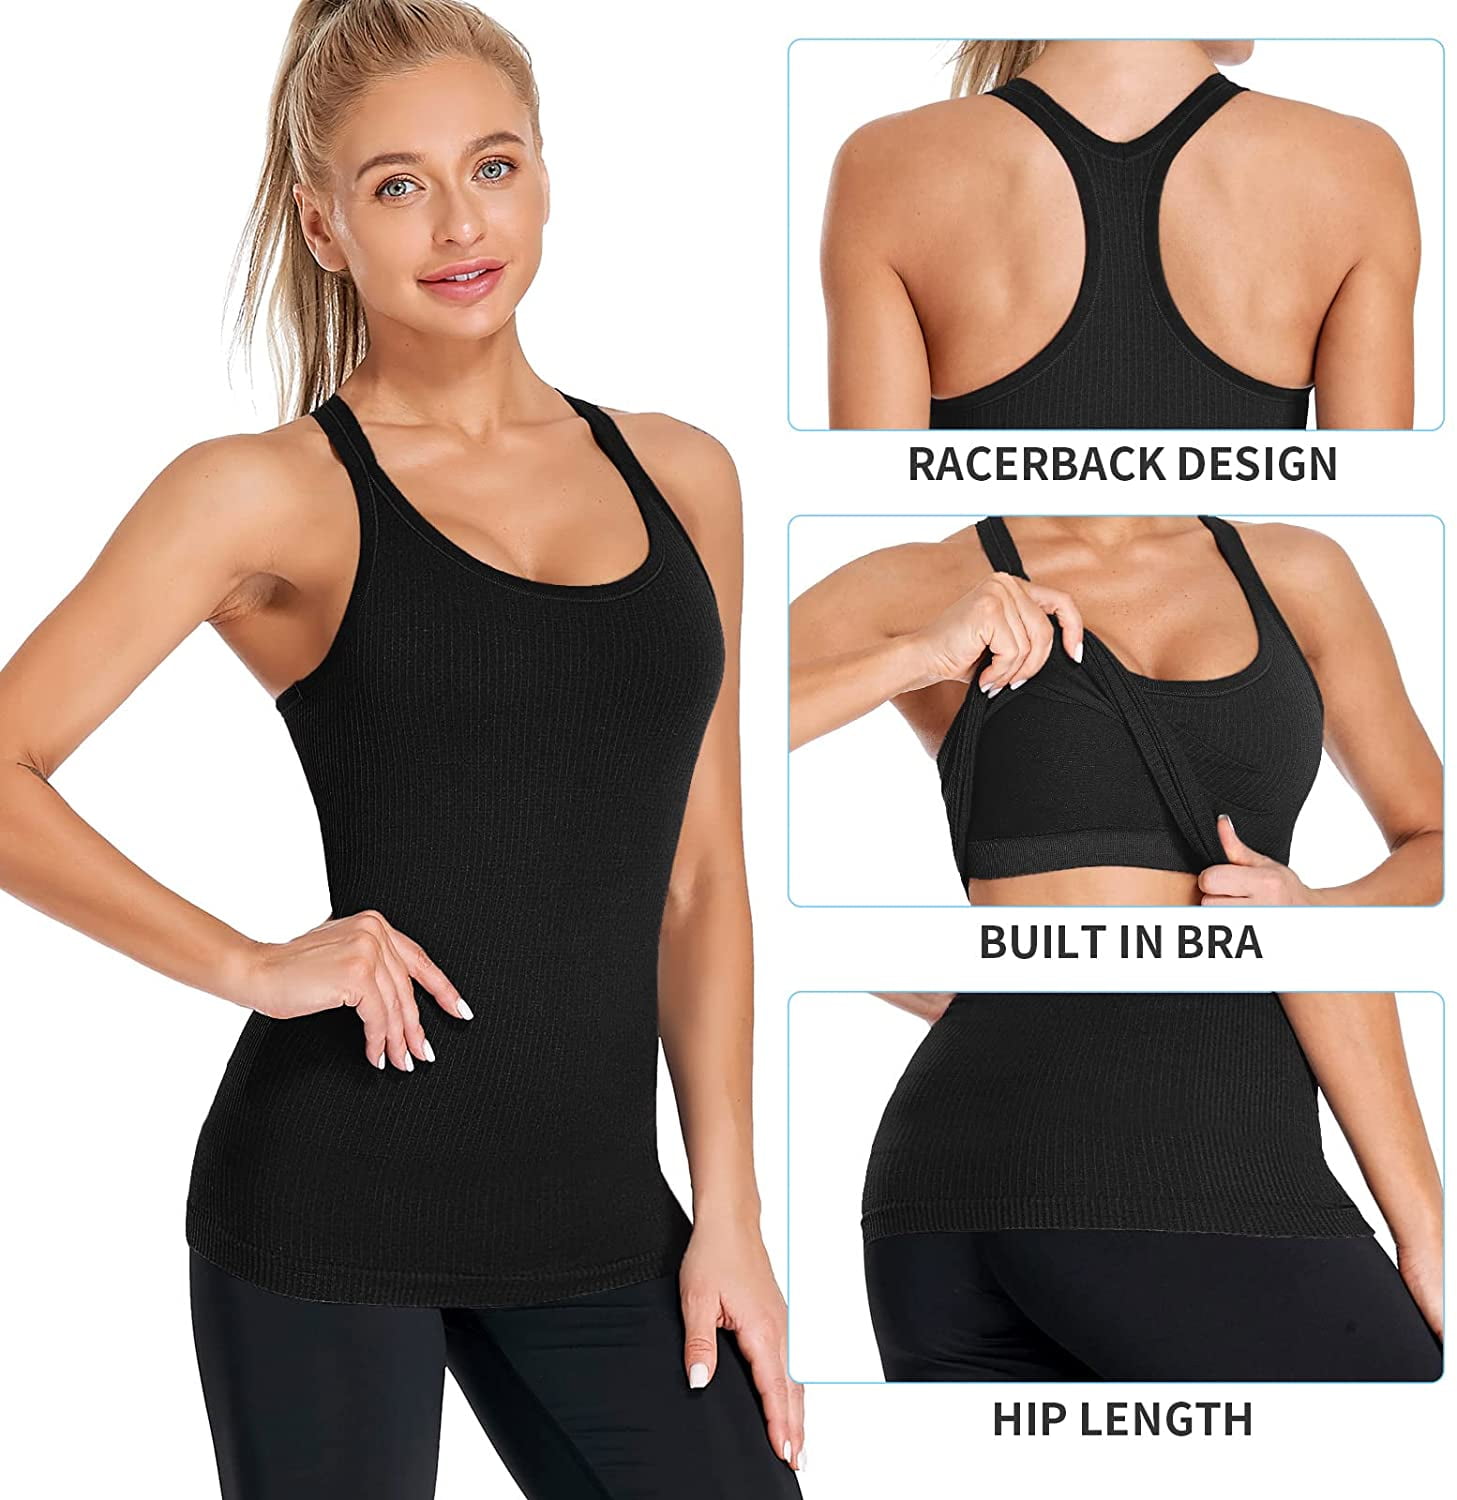 Ribbed Workout Short Racerback Tank Tops for Women with Built in Bra